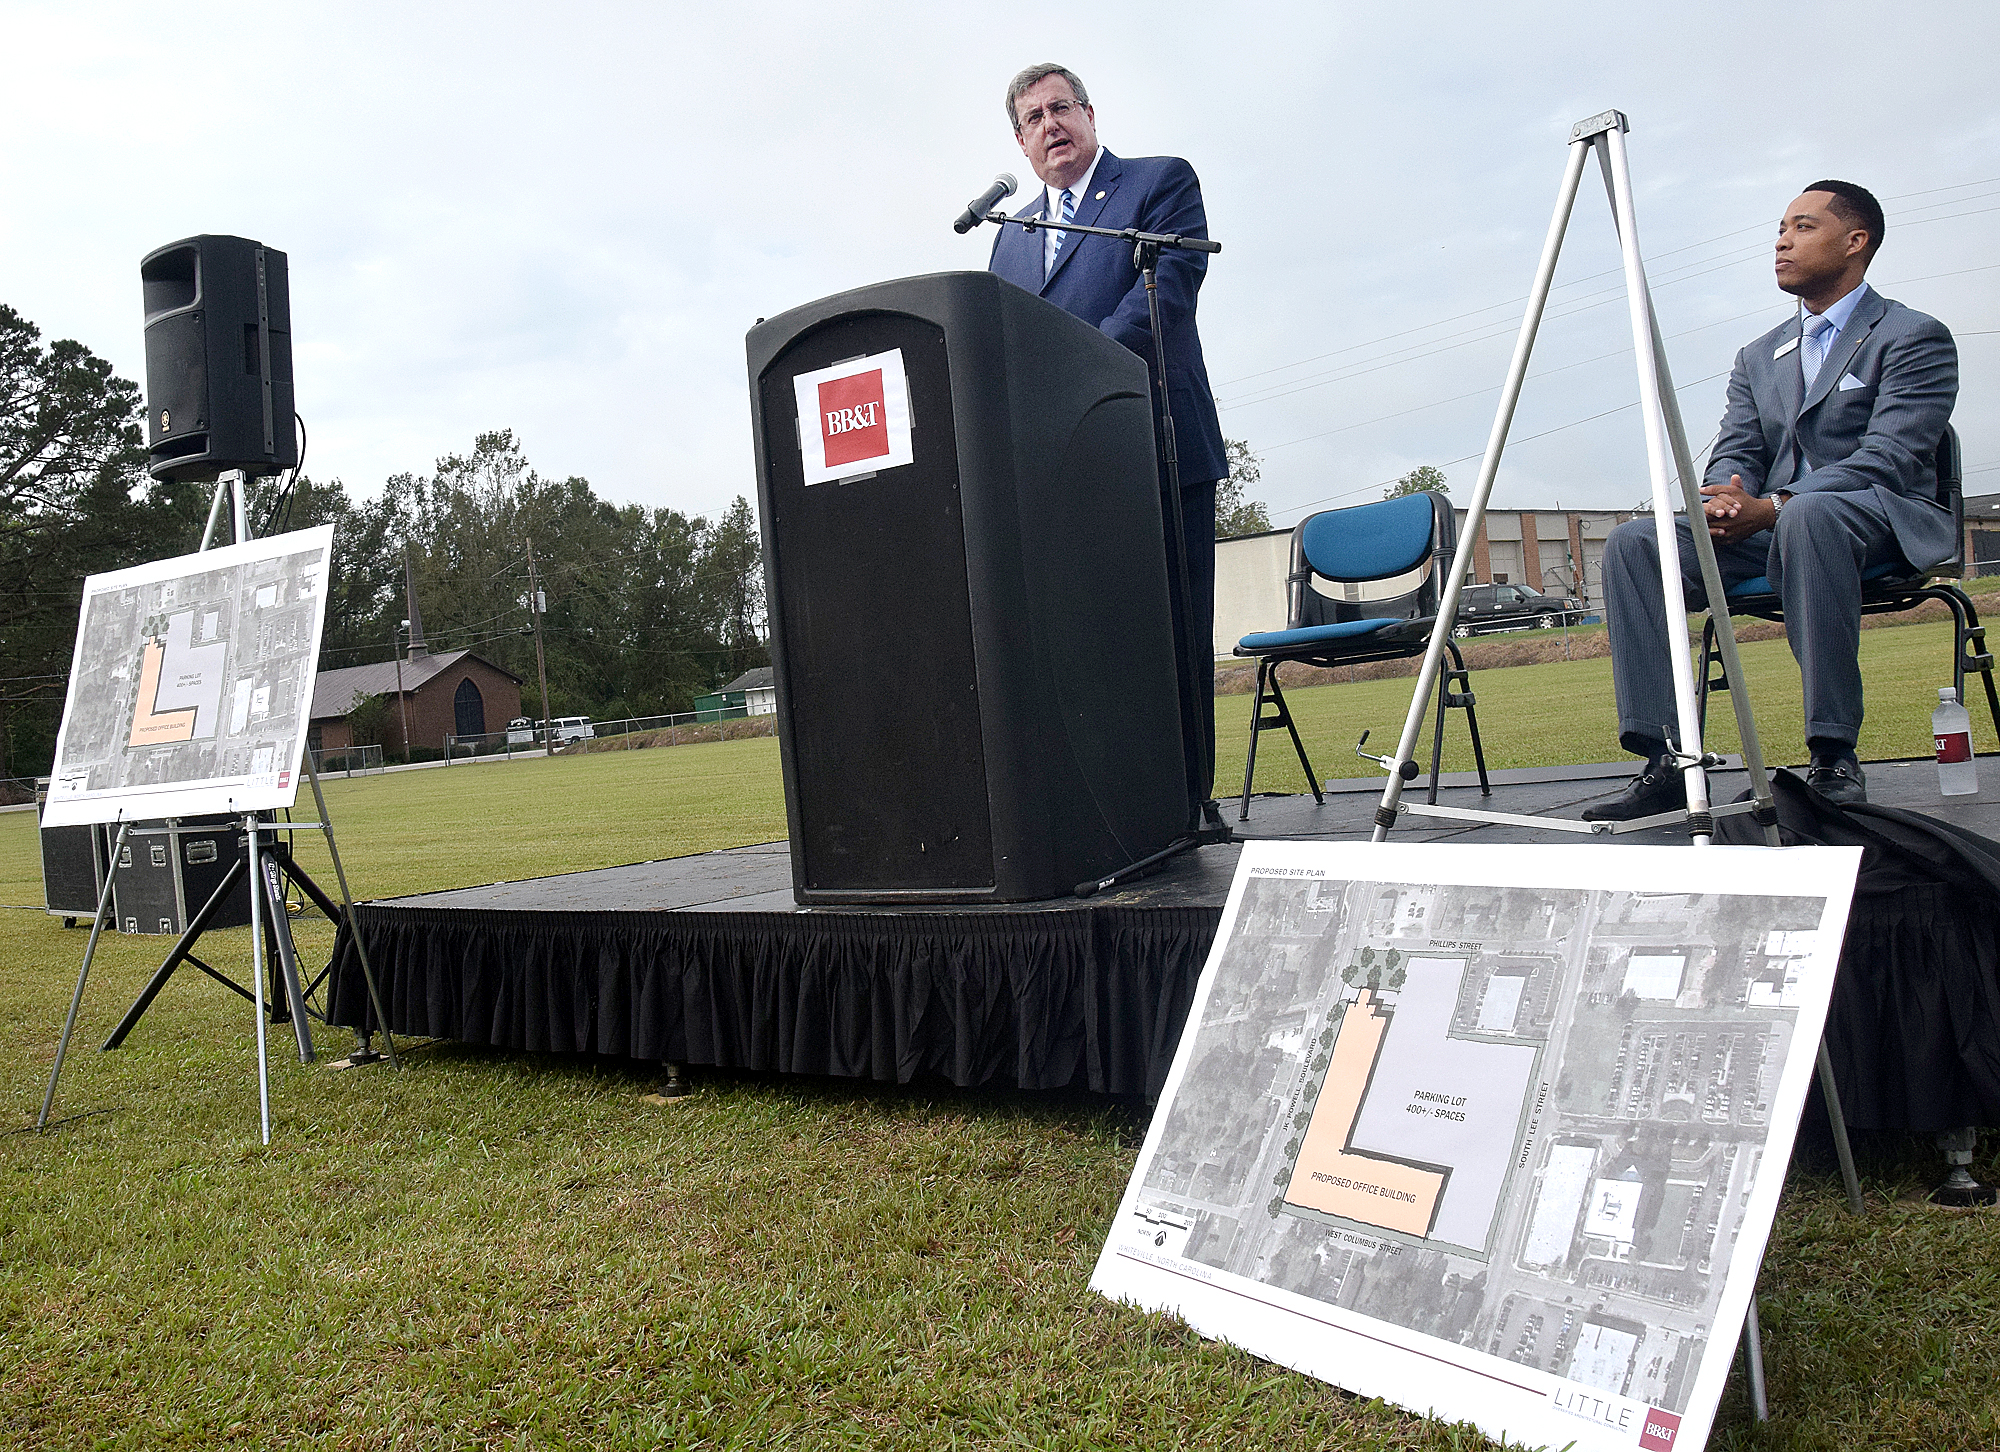 Phil Marion, BB&amp;T southeastern Regional president, speaks at a press conference in Whiteville Tuesday. Staff photo by Les High